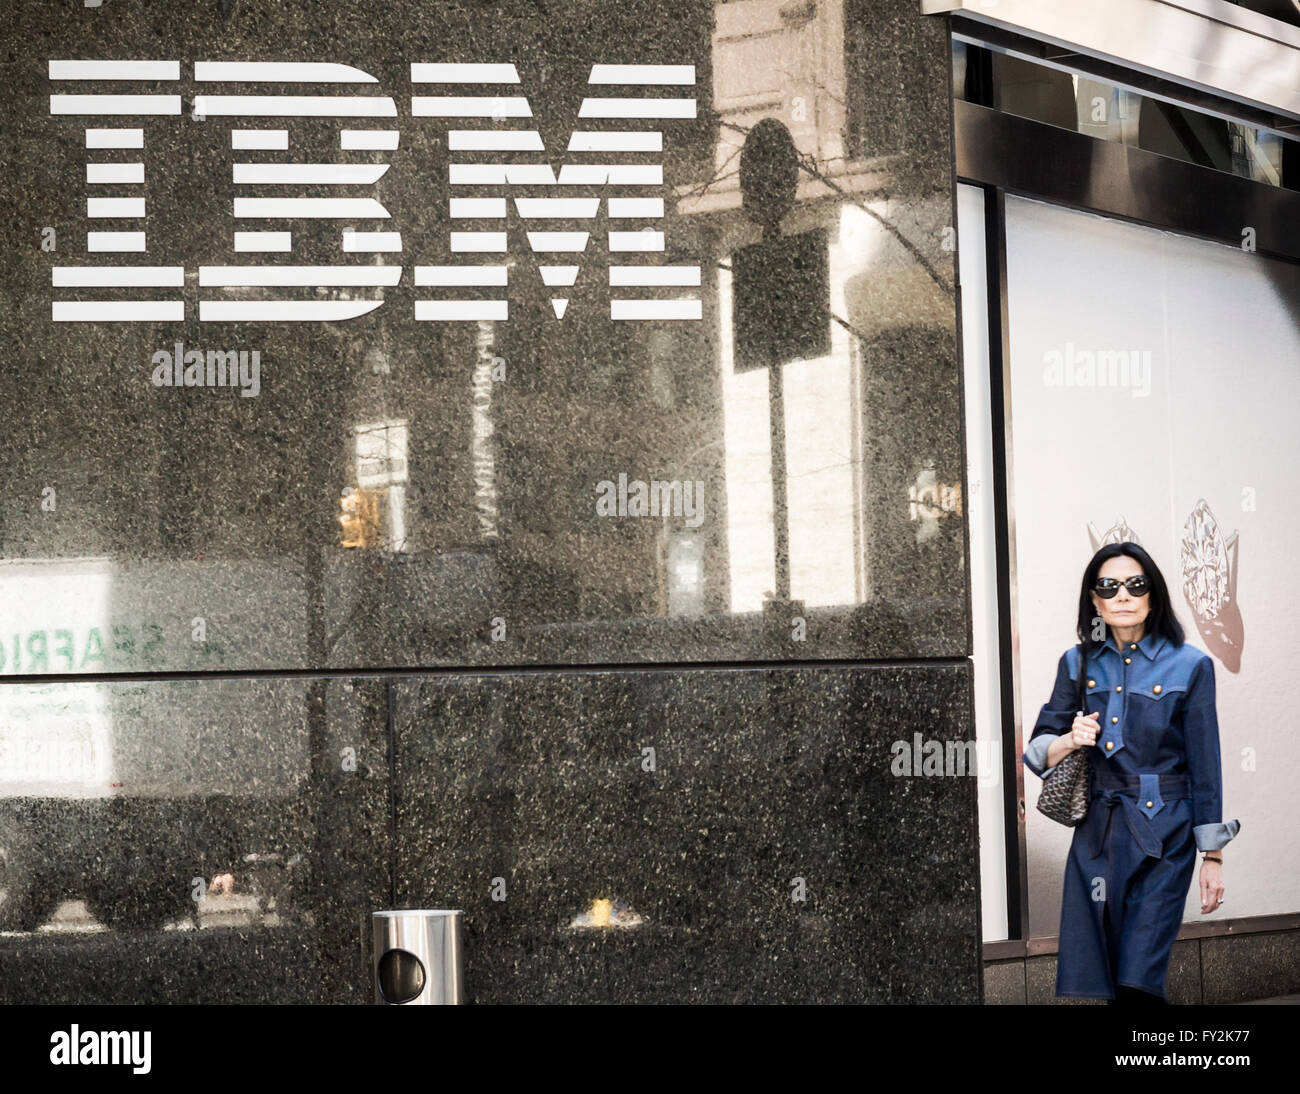 The IBM logo is seen on their building's headquarters in New York on Monday, April 18, 2016. IBM is scheduled to release its first-quarter earnings today after the bell,.(© Richard B. Levine) Stock Photo